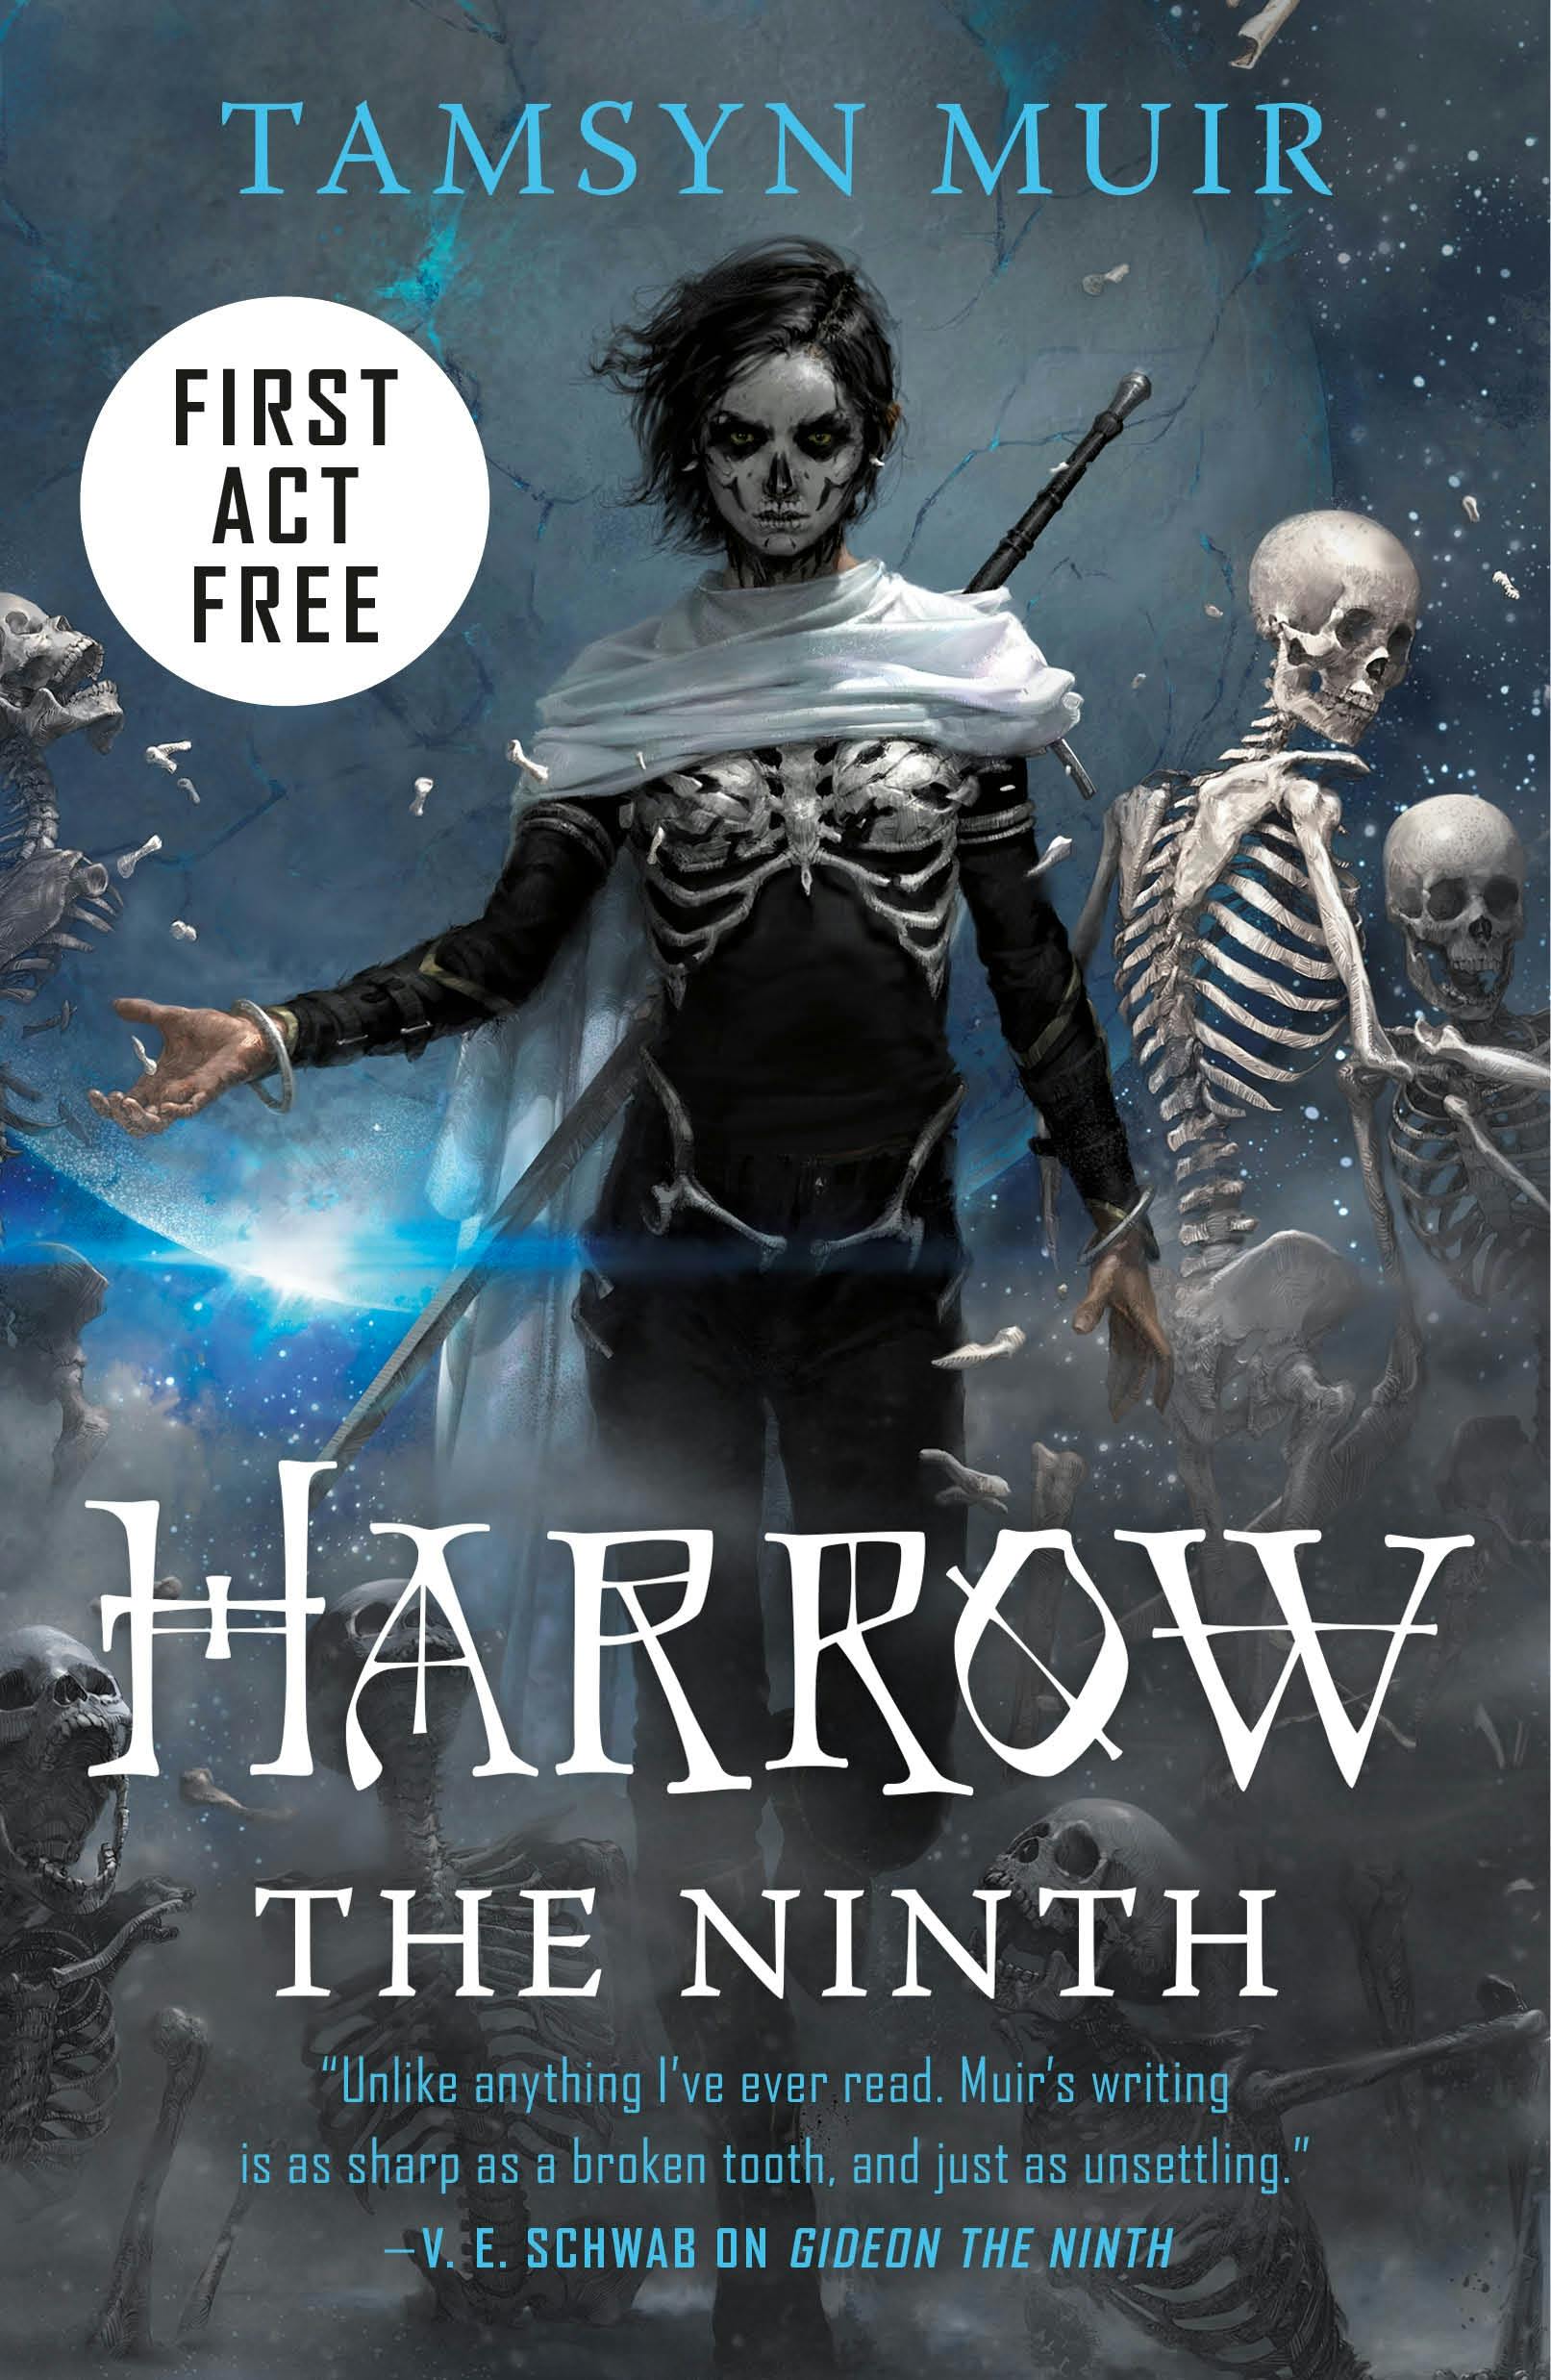 Cover for the book titled as: Harrow the Ninth: Act One